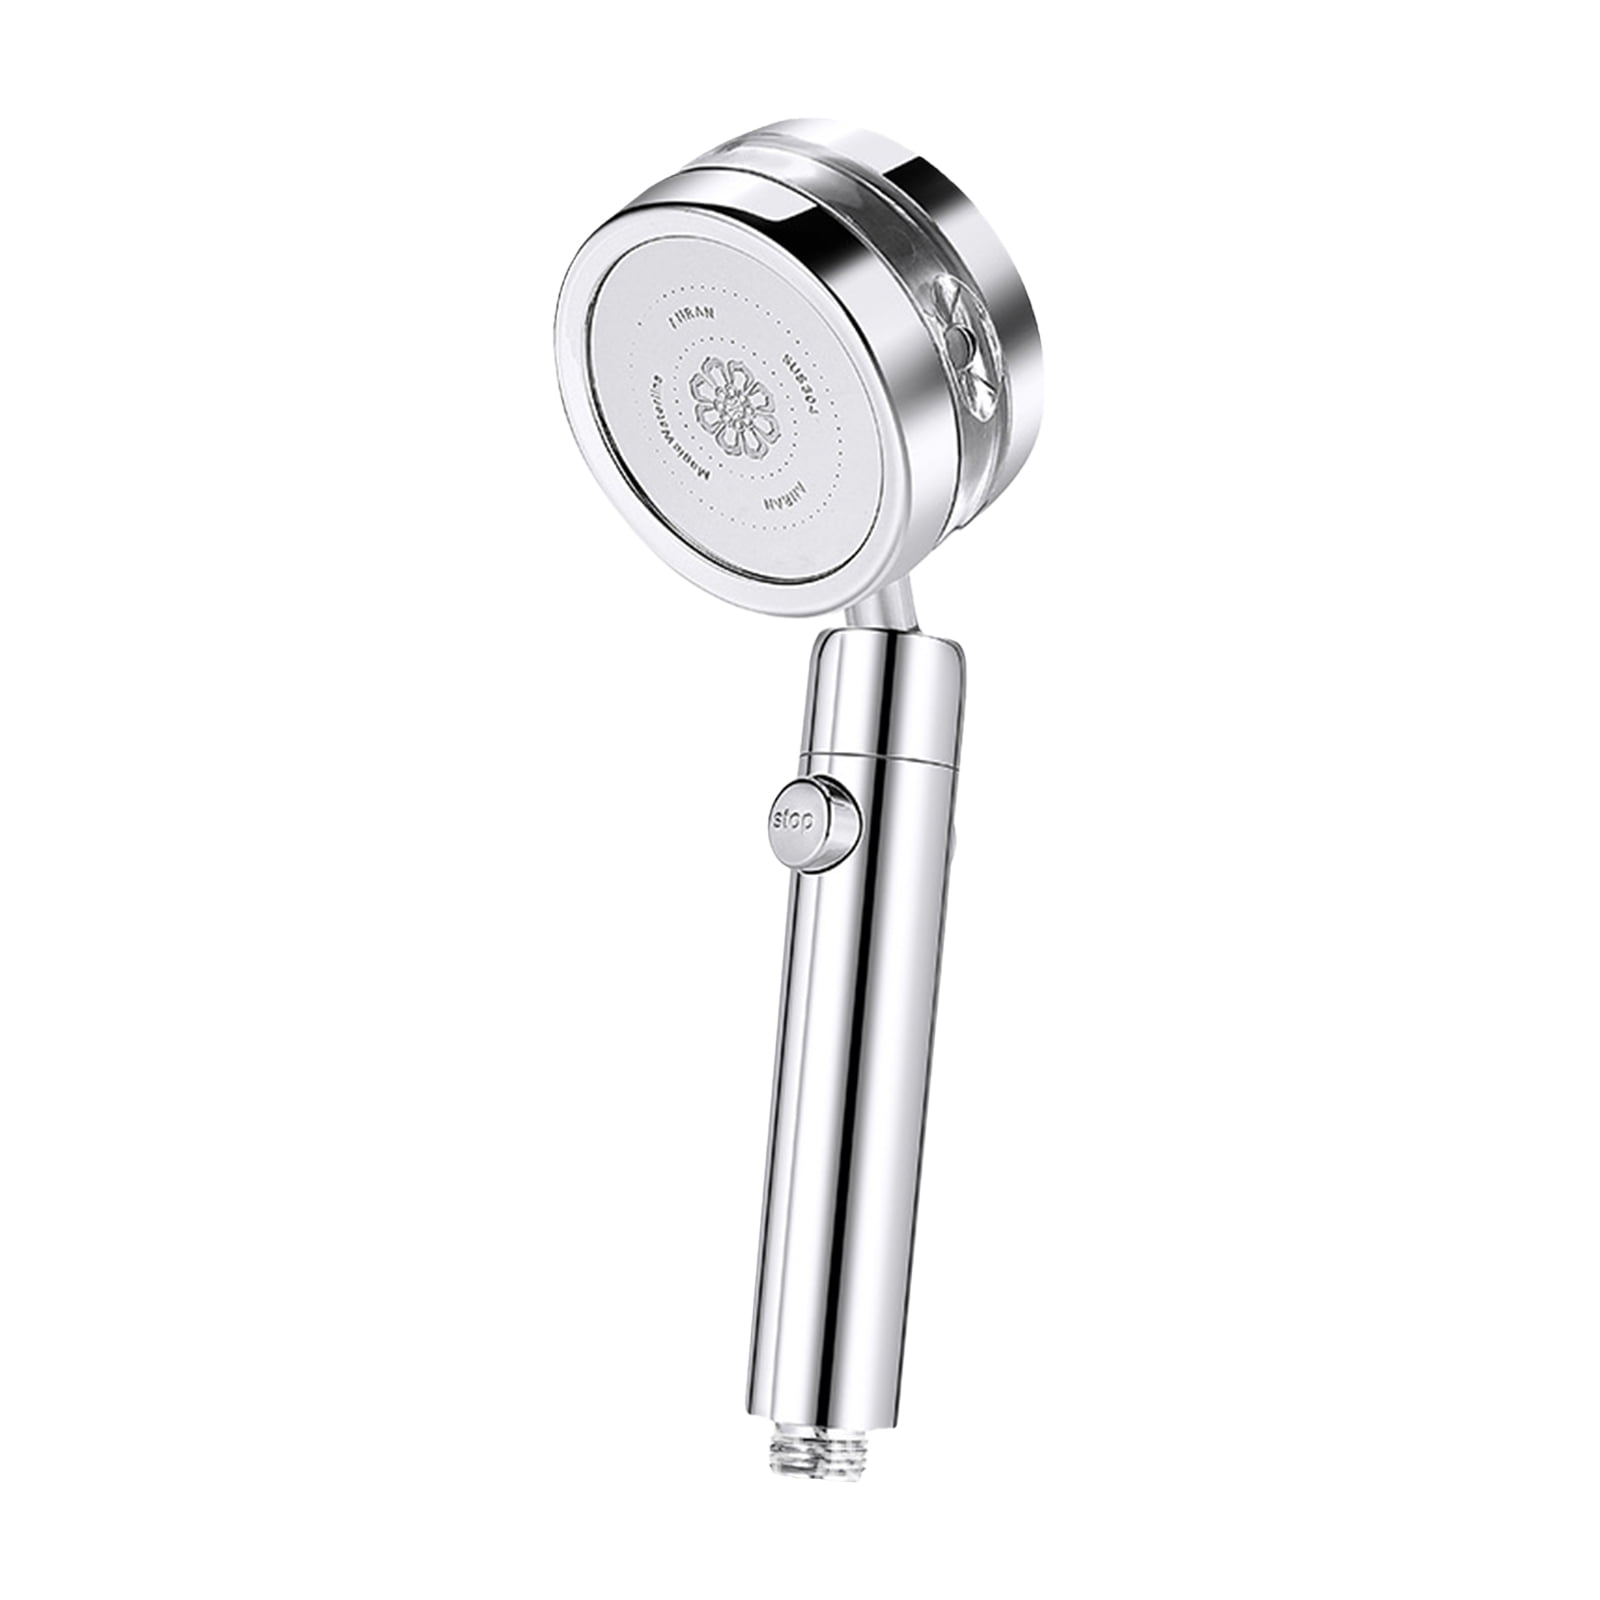 Handheld Shower Head High Pressure with ON/OFF Pause Switch Water Saving 